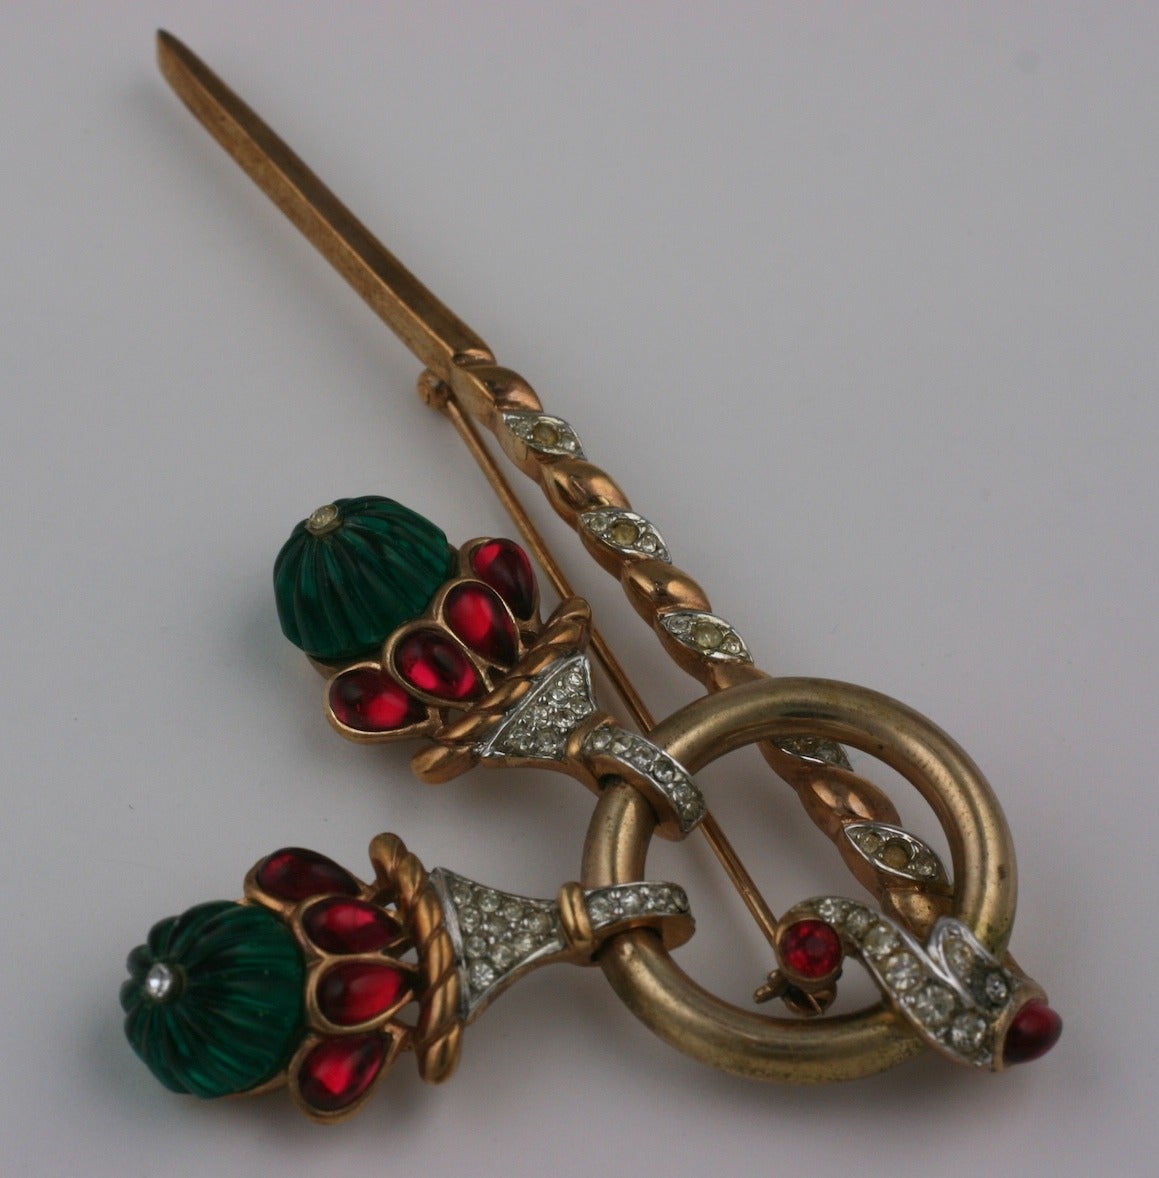 Alfred Philippe signed Trifari Jewels of India brooch.
The brooch is gold tone with ruby and fluted emerald glass cabs and clear rhinestone pave.
The dangles can move slightly along the ring as well. 1940's USA.
Excellent condition.
3-1/2